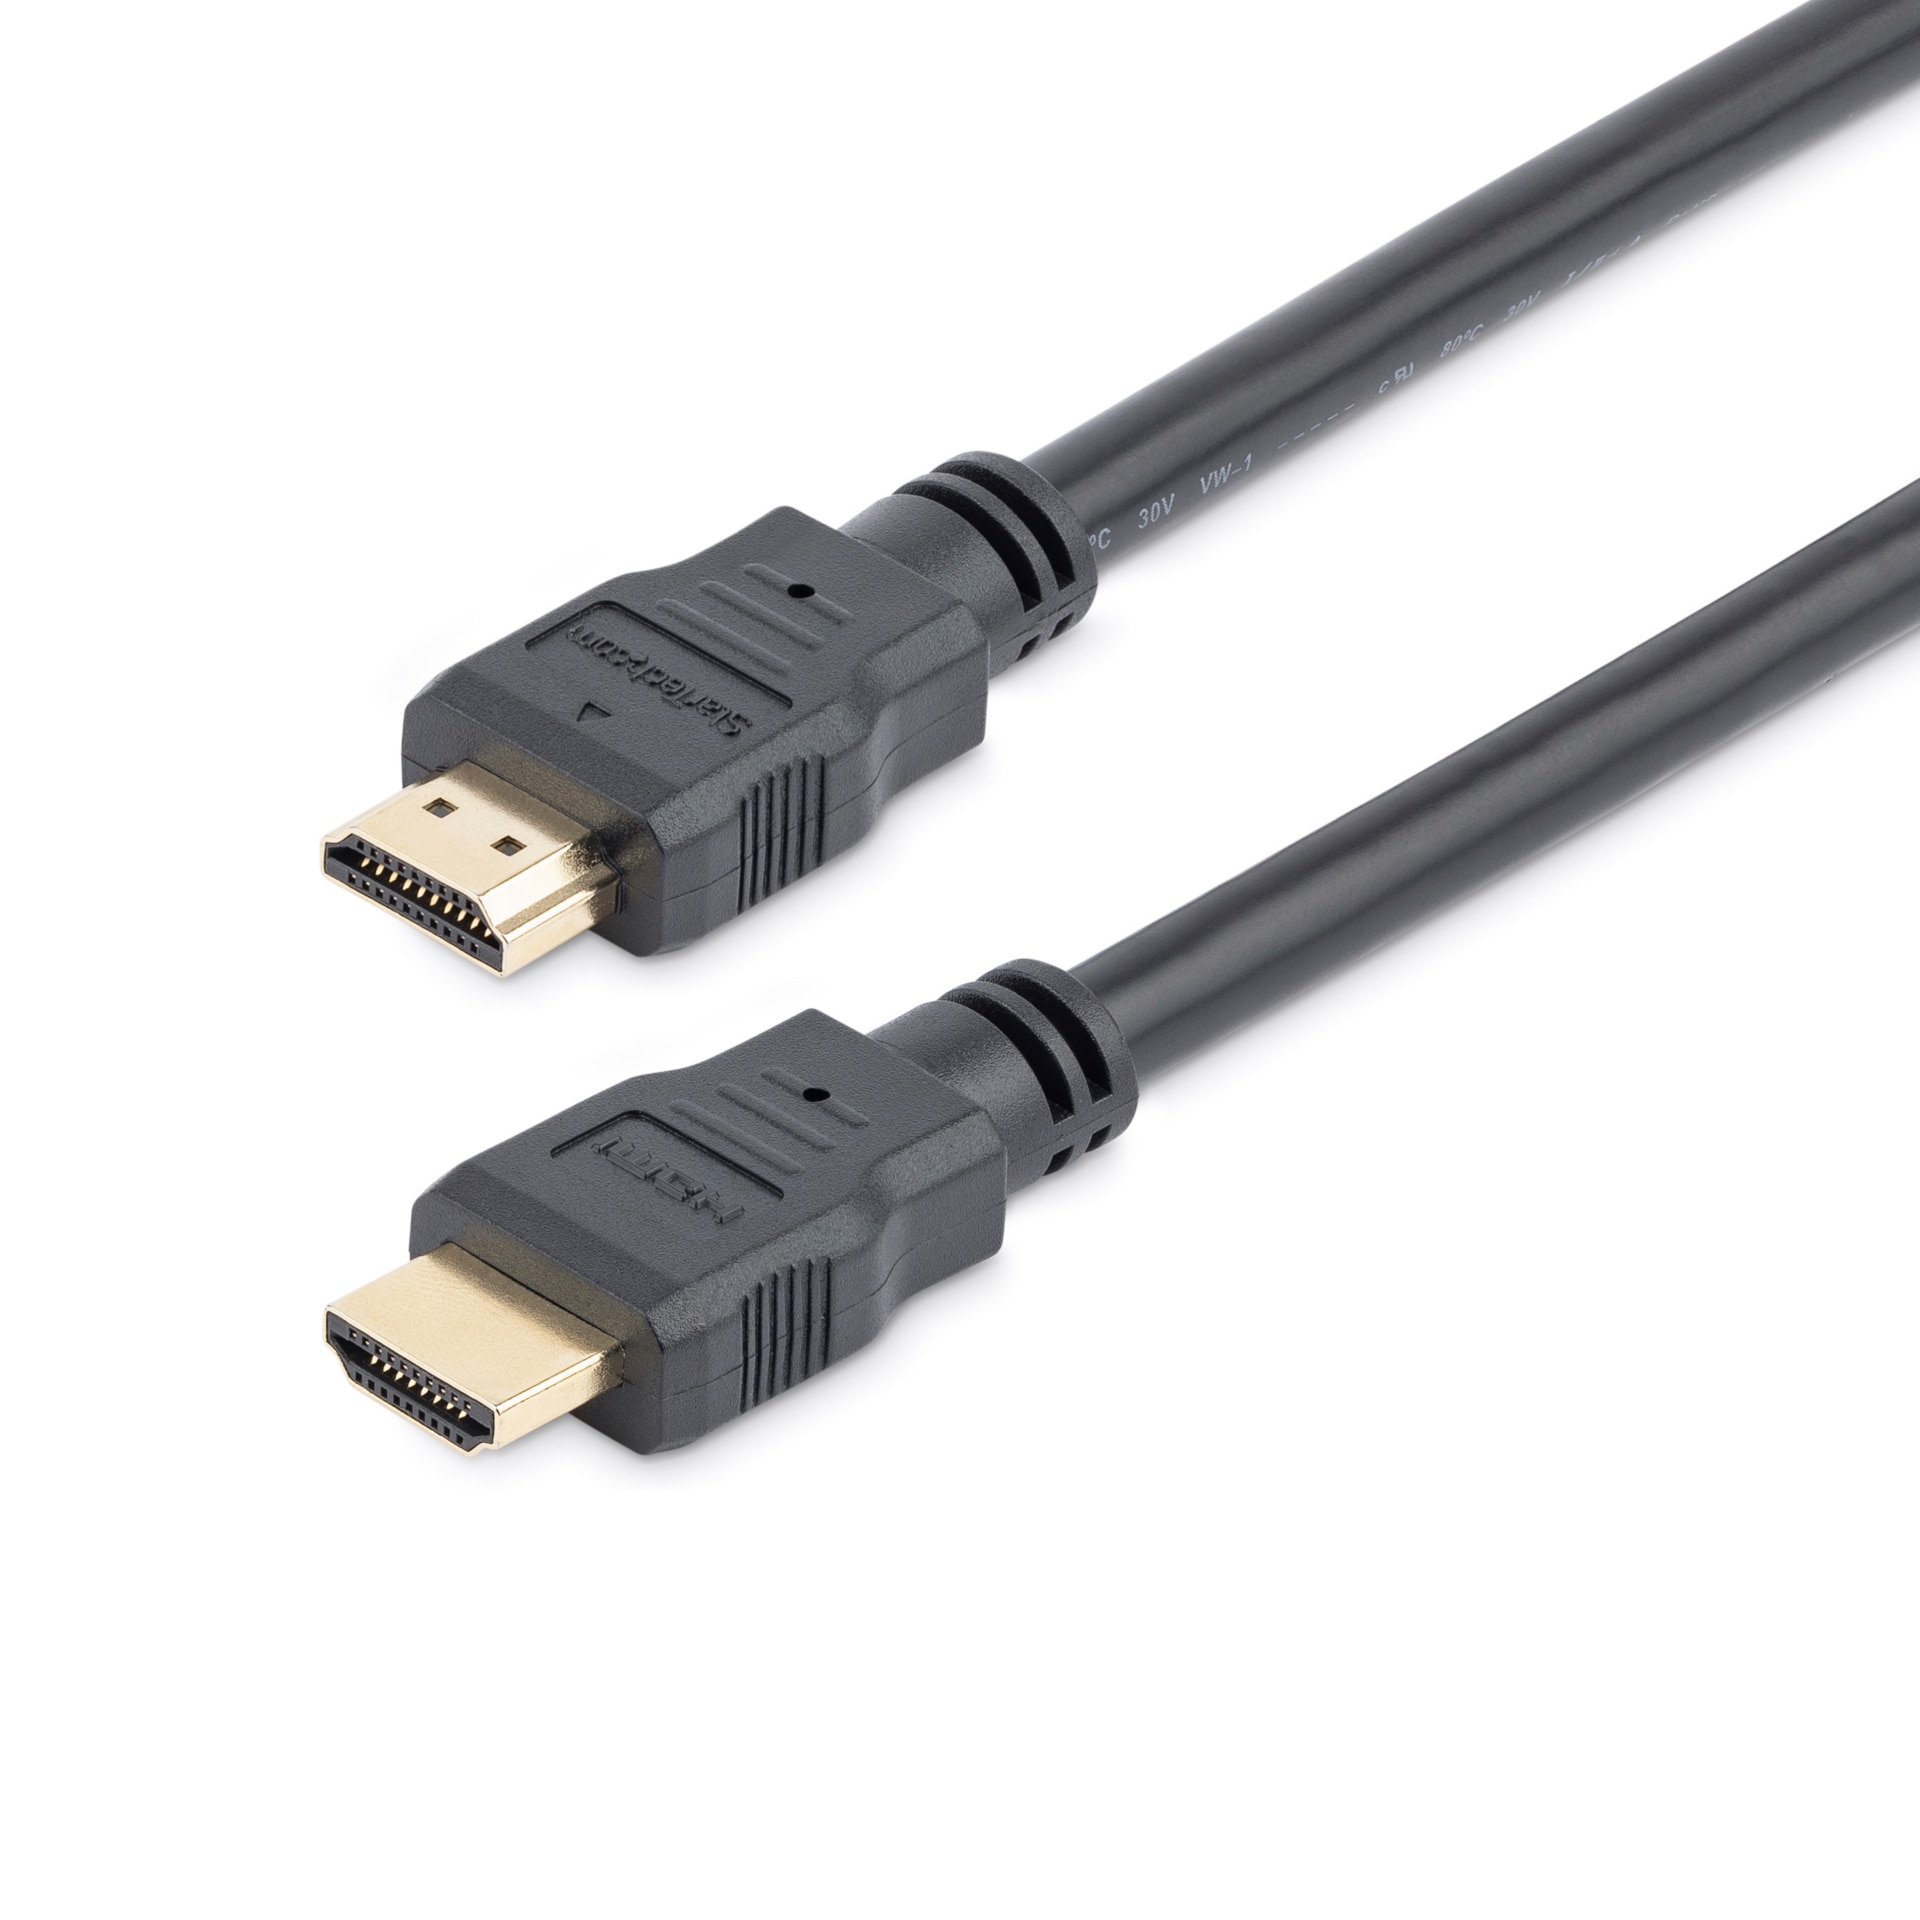 StarTech.com 1' 30cm Premium Certified High Speed HDMI 1.4 Cable w/Ethernet